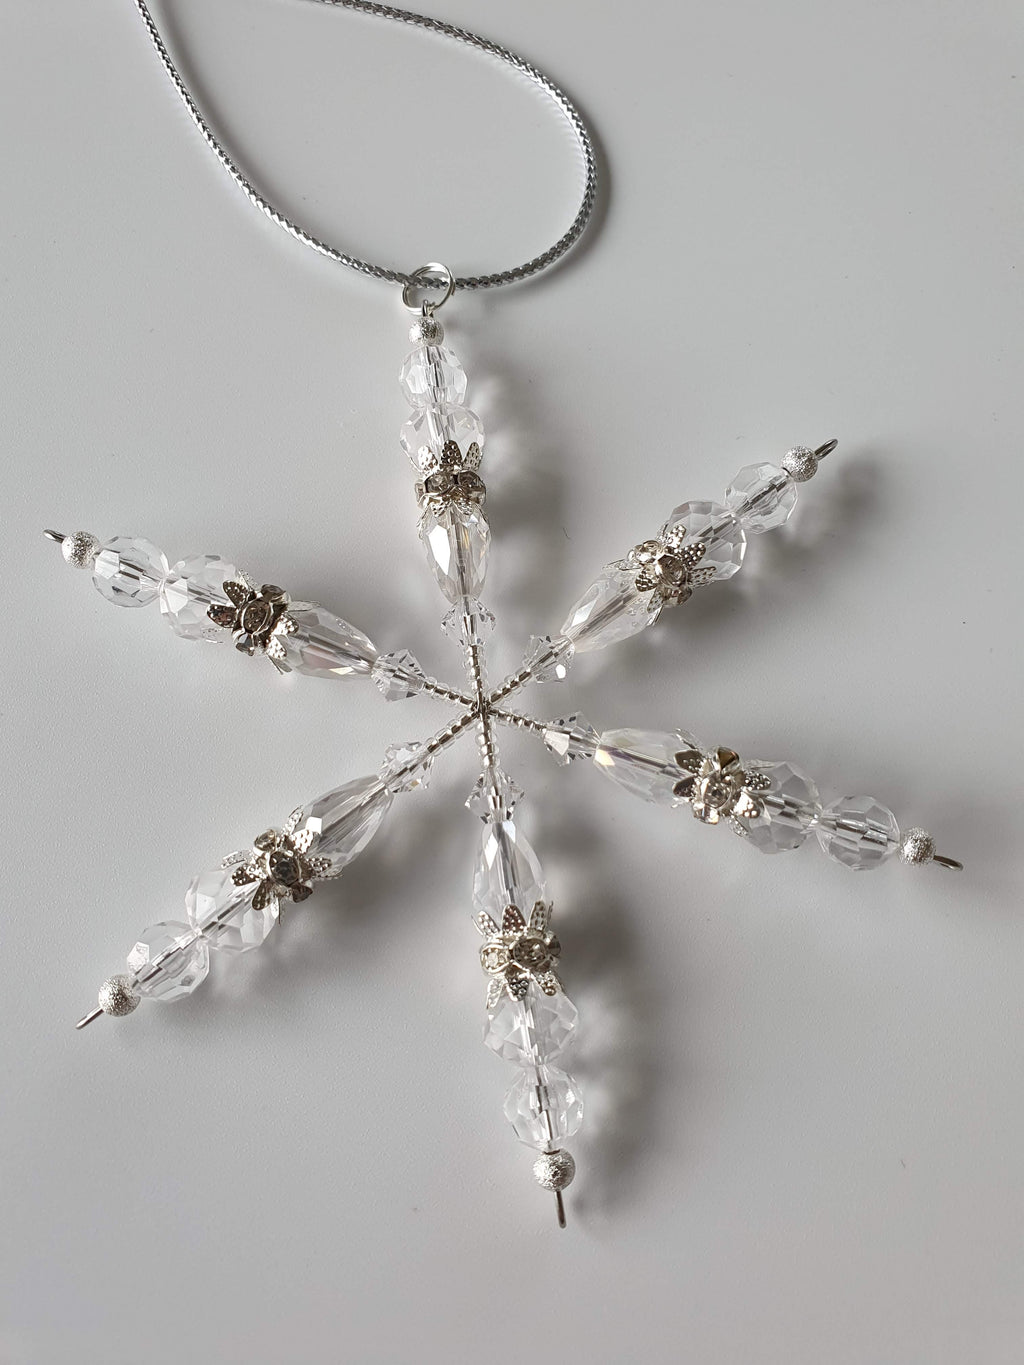 A silver snowflake with clear beads.